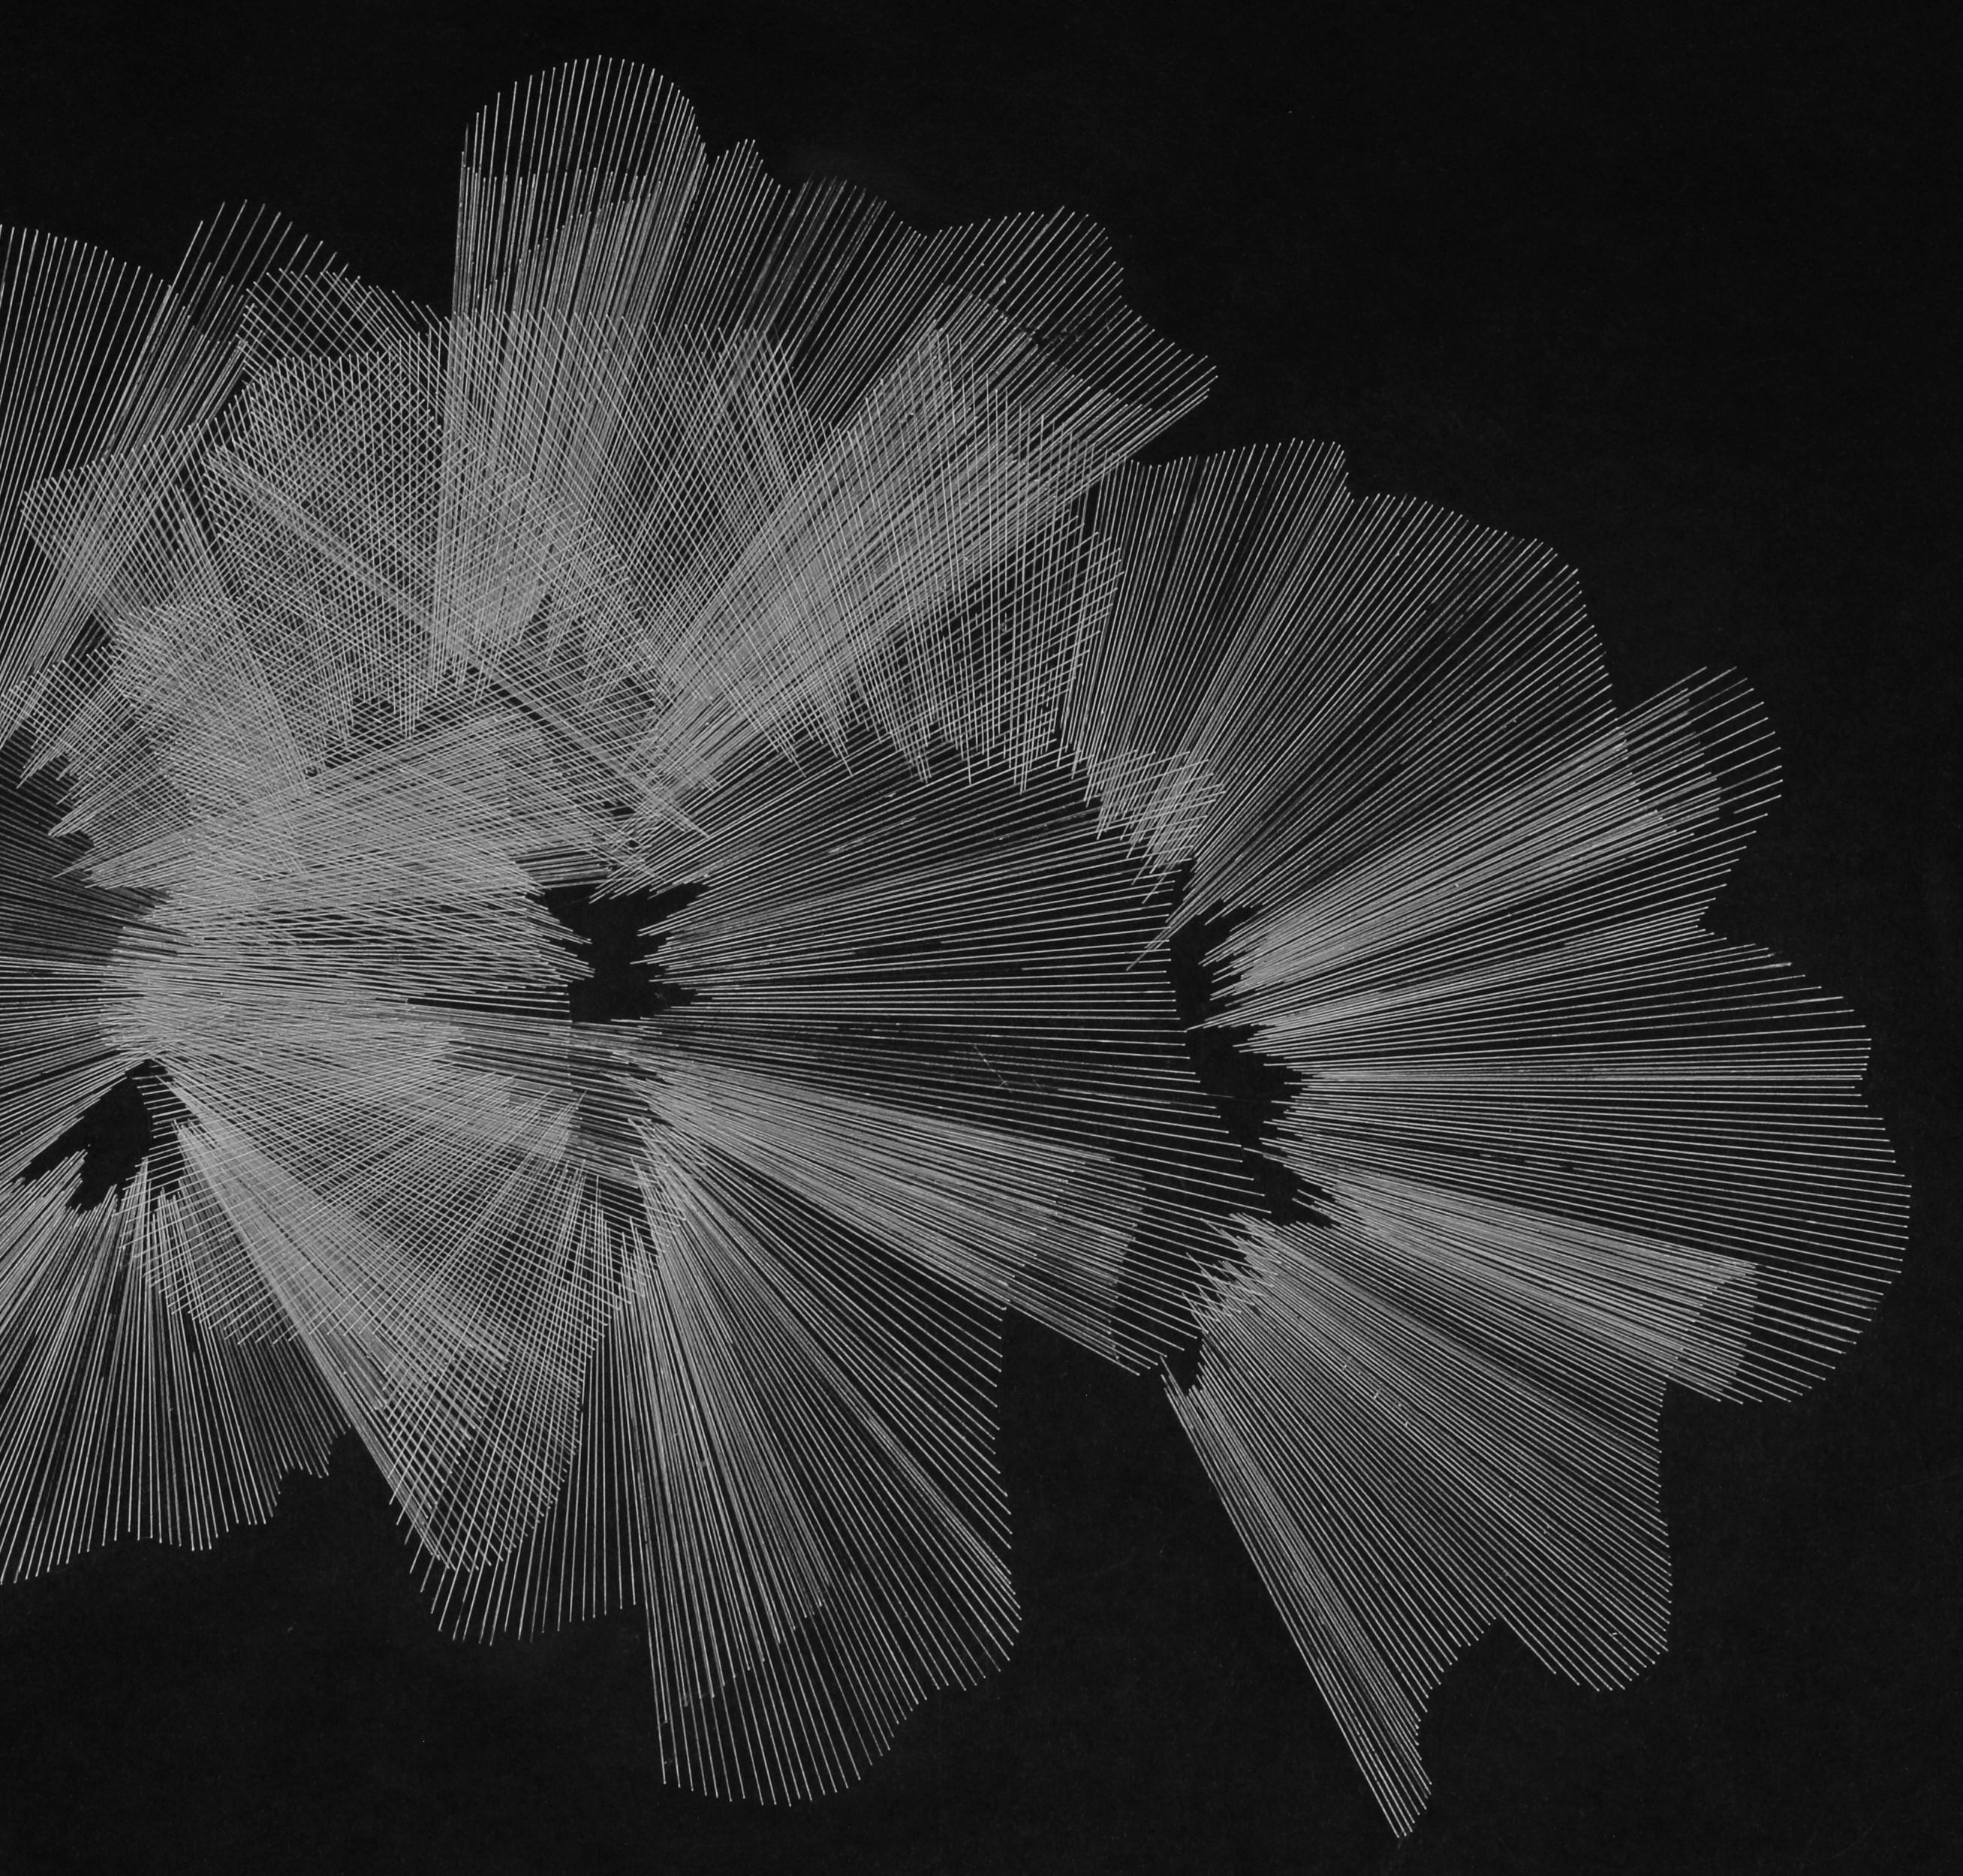 G_43, 2021
white ink on black cardboard
(signed on reverse)
27 9/16 H x 39 3/8 W in.
70 H x 100 W cm

Alina Aldea's drawings project all the possible forms which appear to disappear without a particular reference or consequence rapidly. The artist's